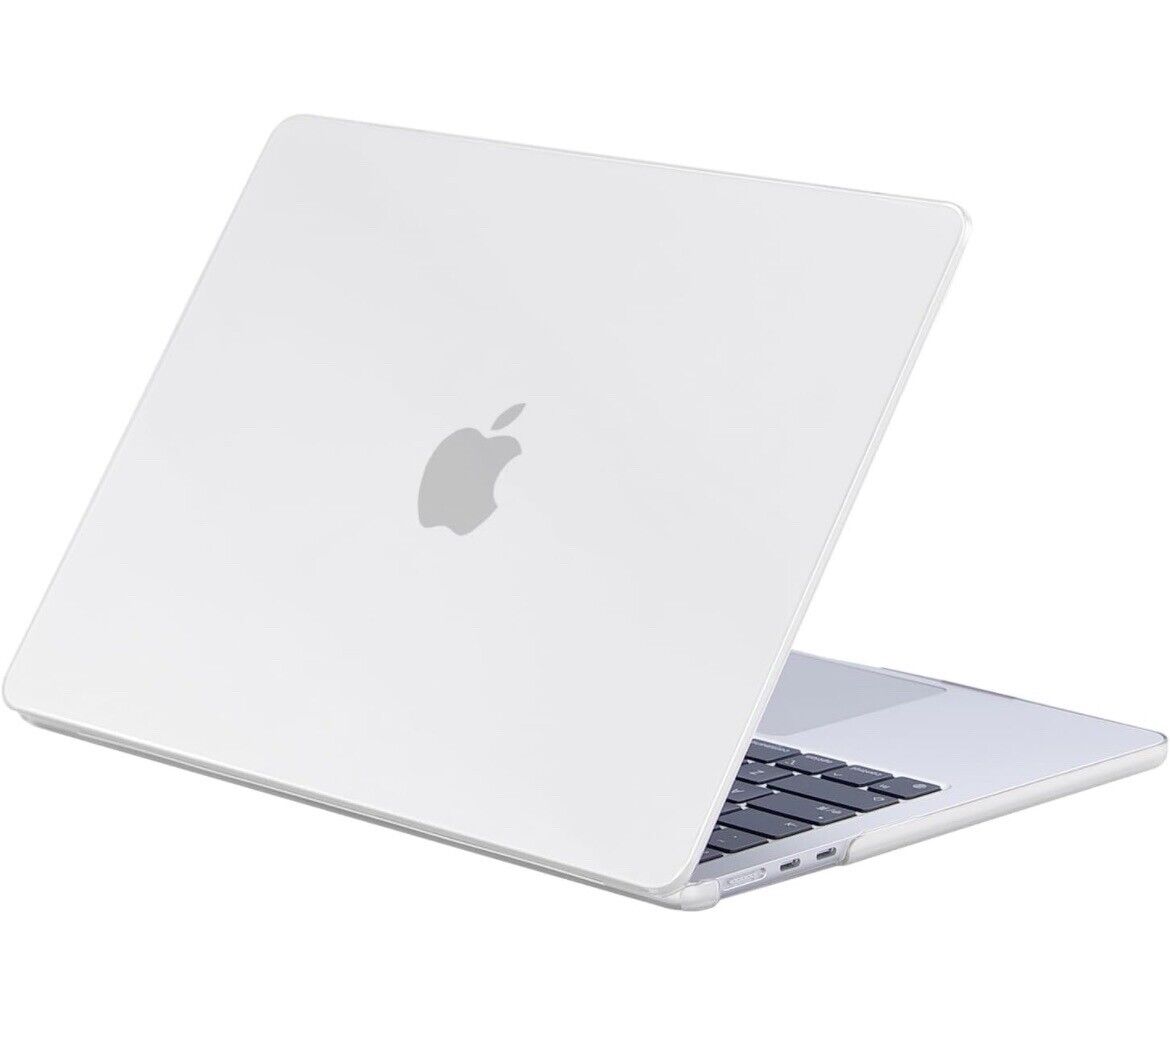 Hard Plastic Case and Keyboard Protector for MacBook Air 13 Inch, Matte Clear77”